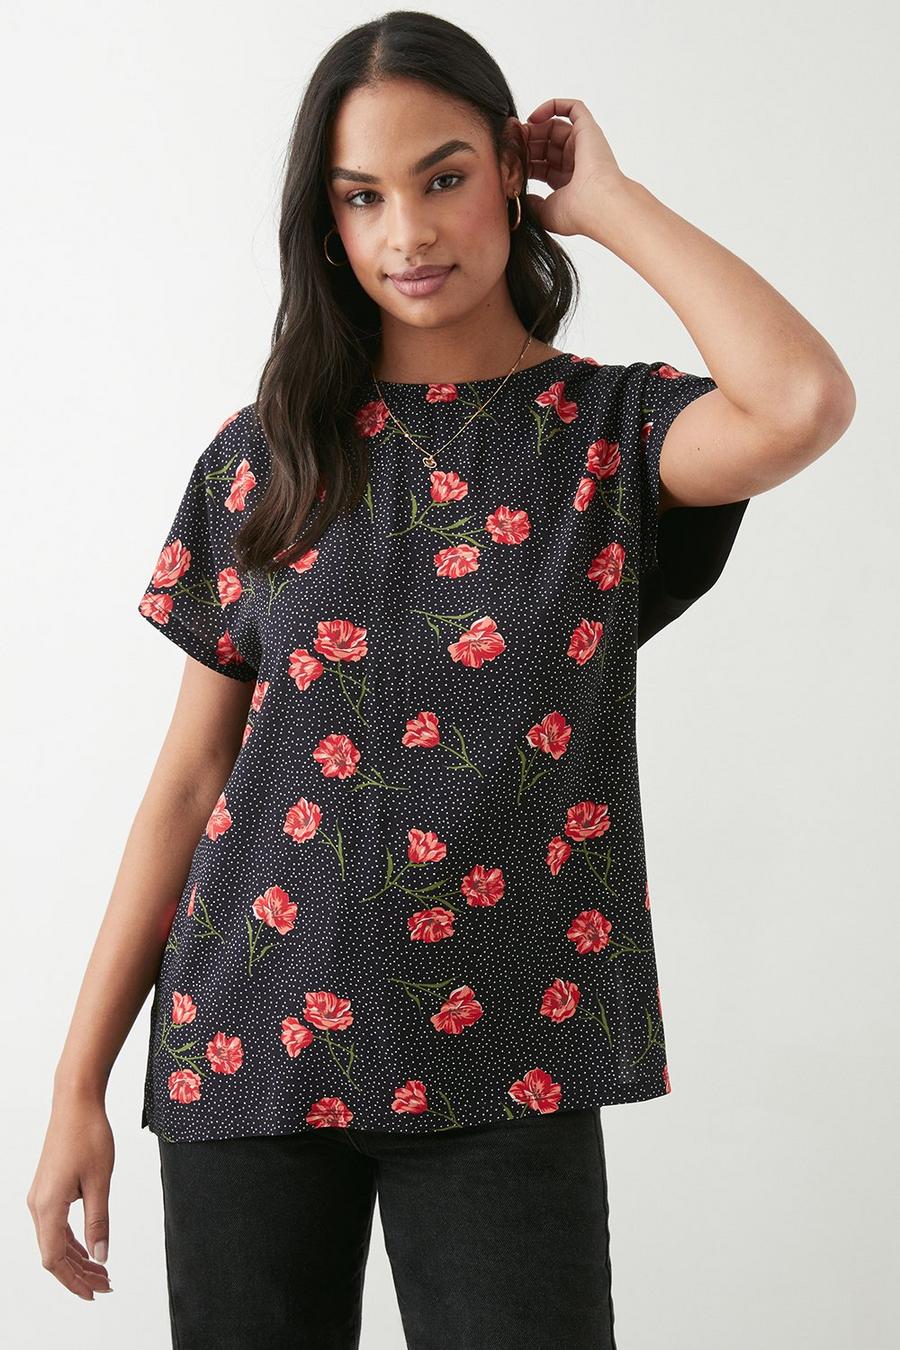 Red Floral Short Sleeve Top